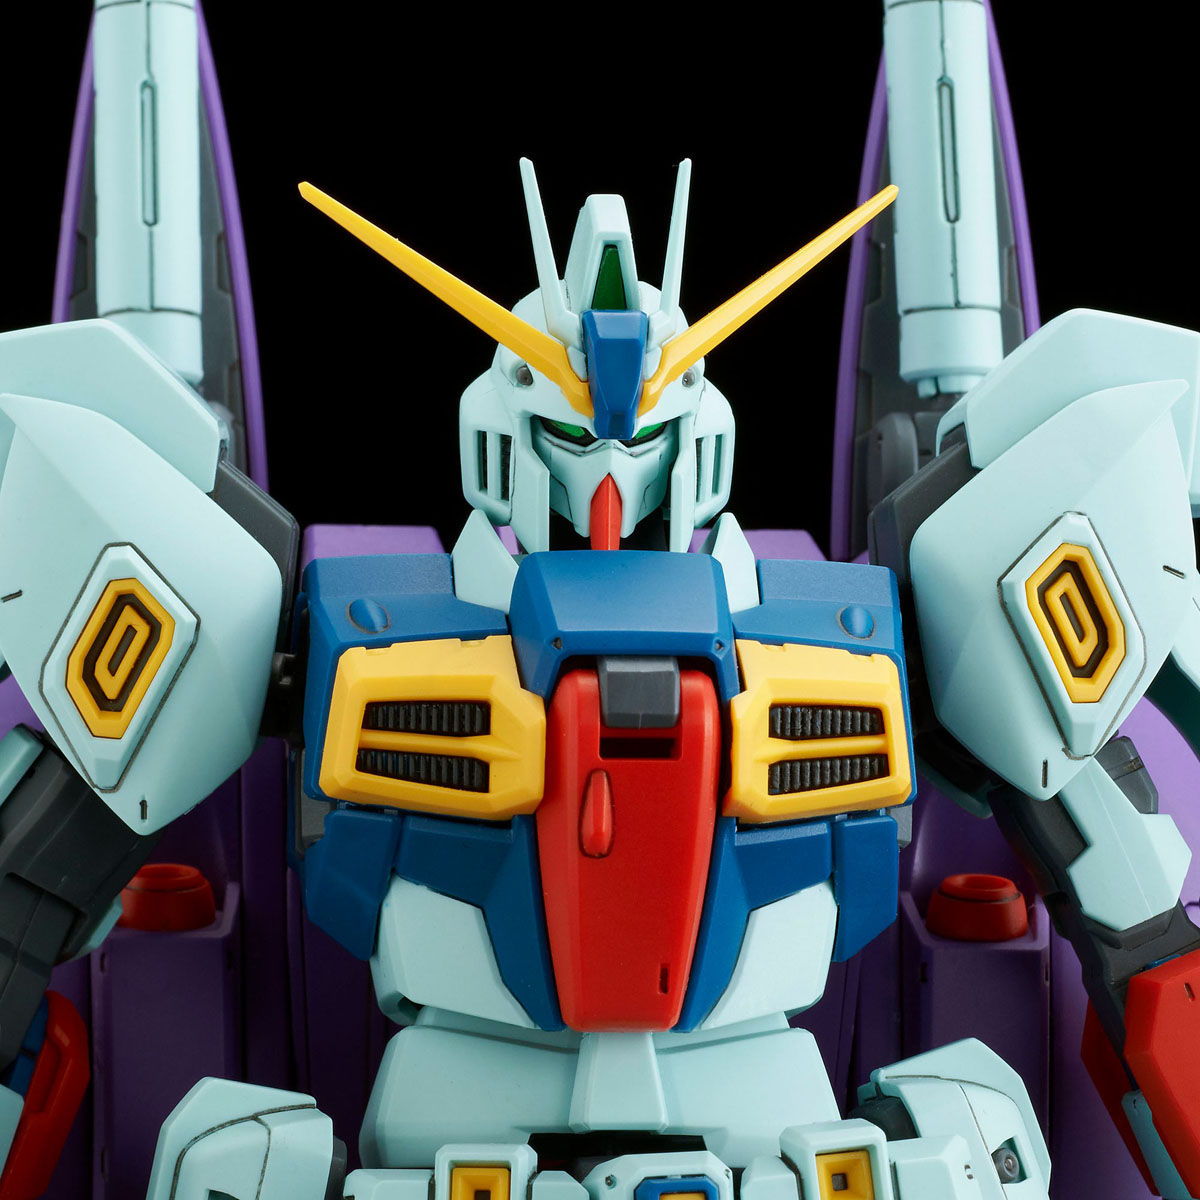 P Bandai Mg 1 100 Re Gz Custom Reissue Release Info Gundam Kits Collection News And Reviews